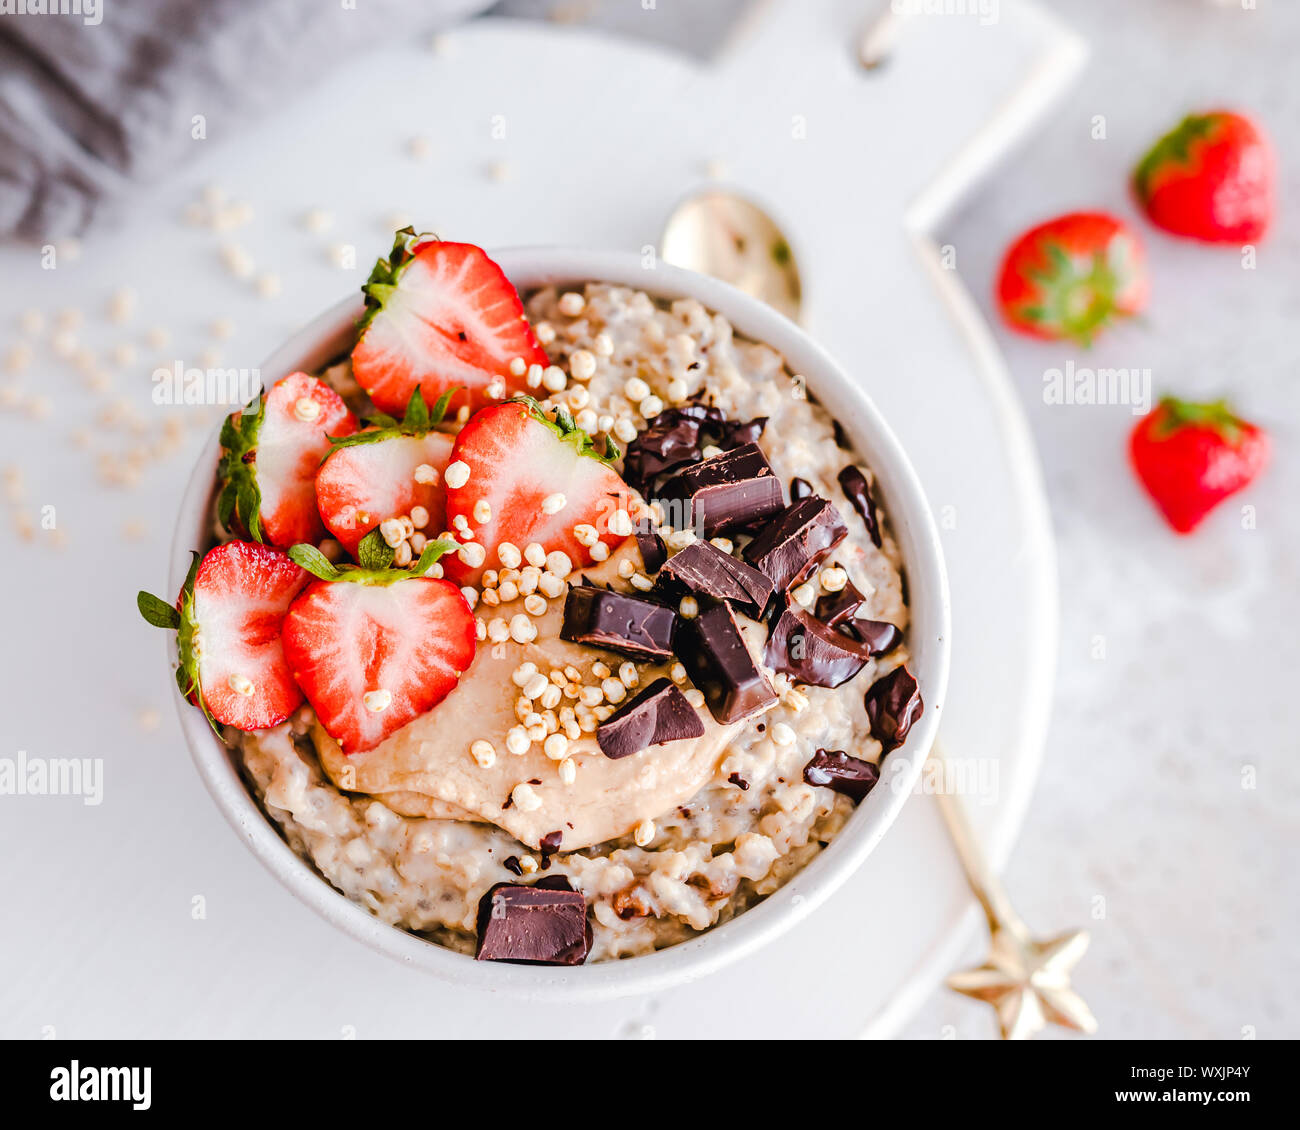 Oatmeal bowl with strawberries, peanut butter, chocolate and puffed rice Stock Photo